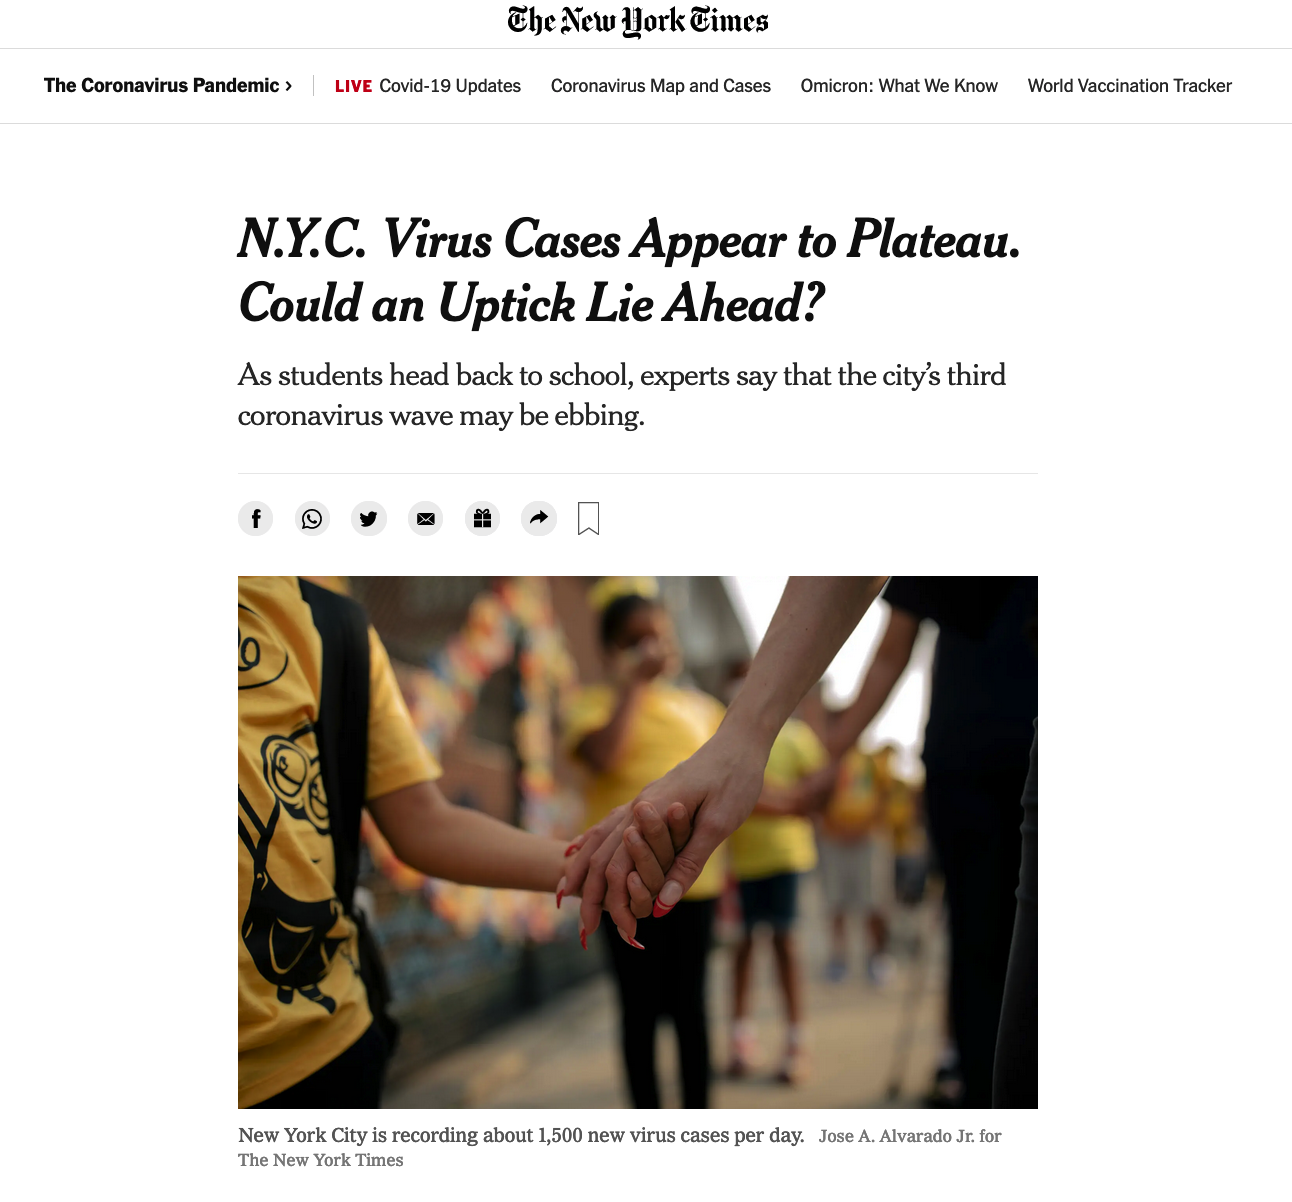 for The New York Times: N.Y.C. Virus Cases Appear to Plateau. Could an Uptick Lie Ahead?